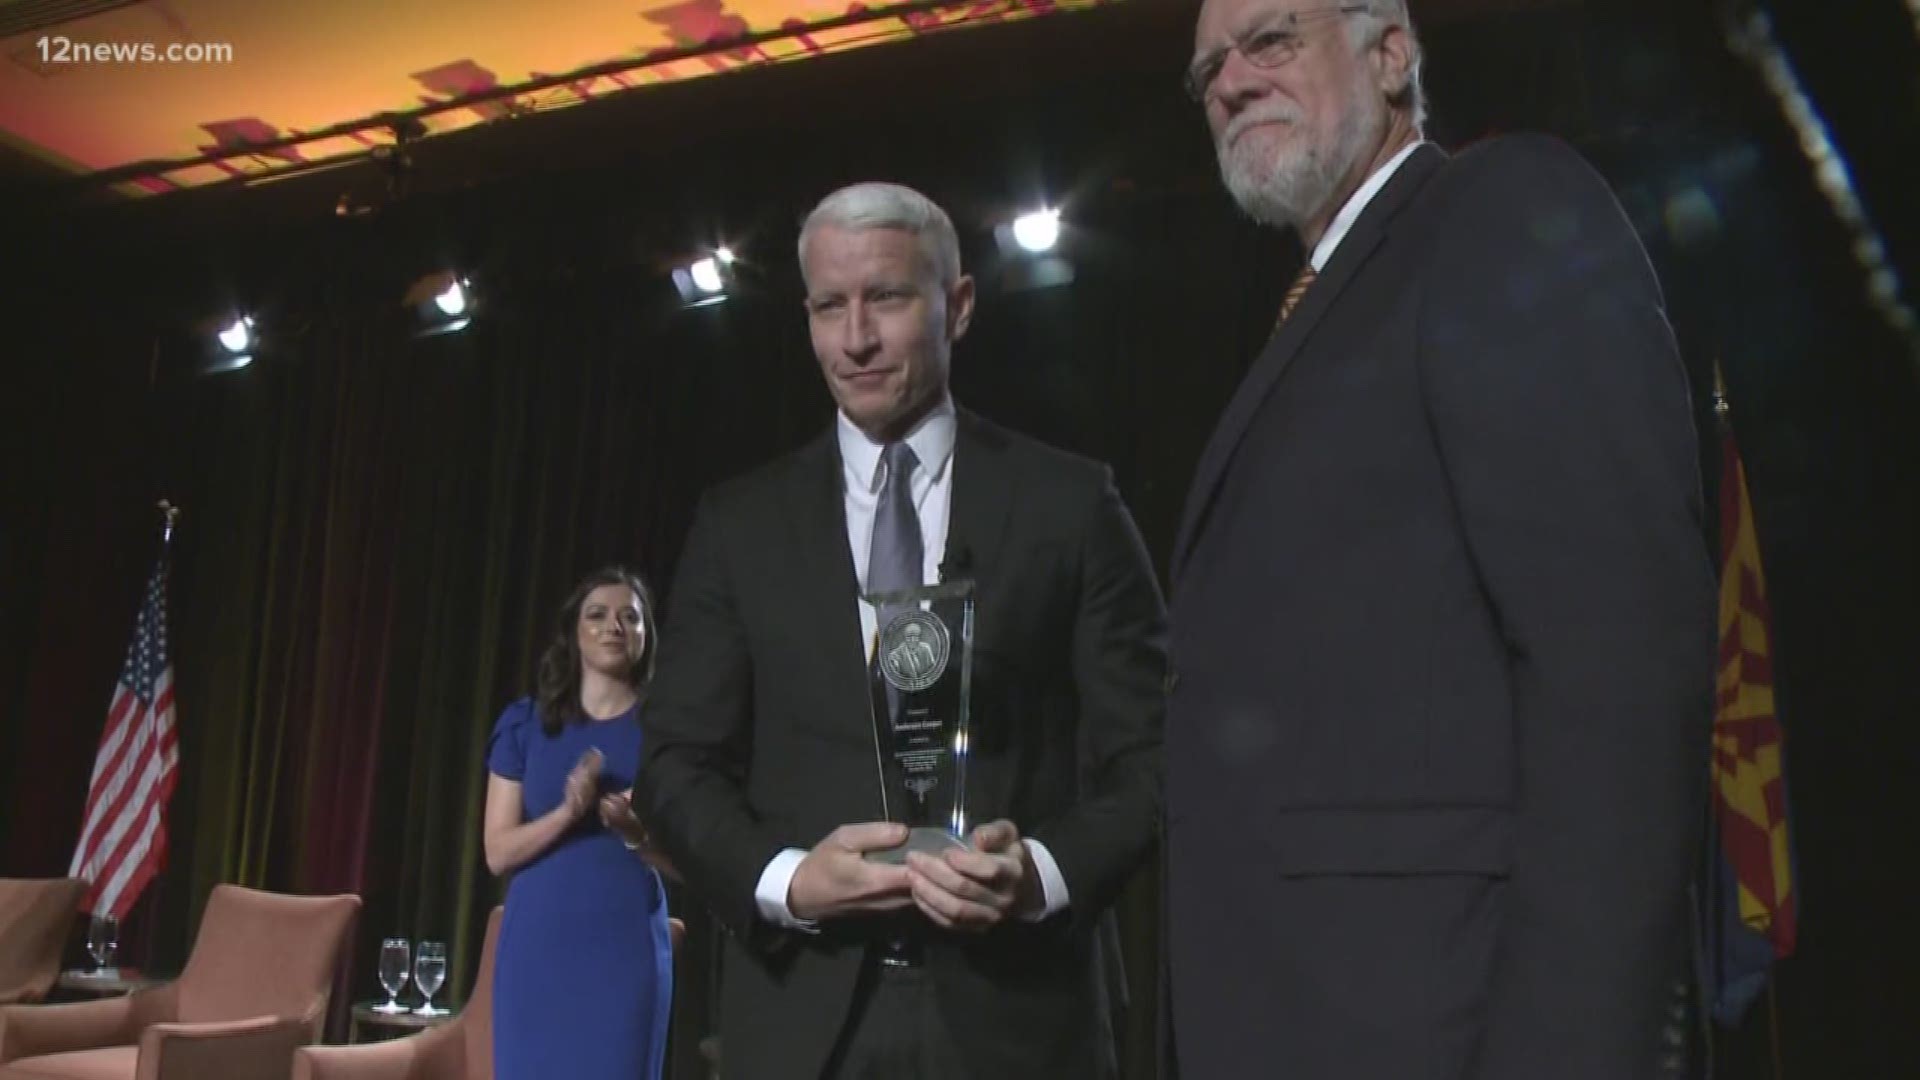 CNN's Anderson Cooper was in the Valley this afternoon to receive the Walter Cronkite Award for Excellence. Cooper said his travels inspired his brand of journalism.